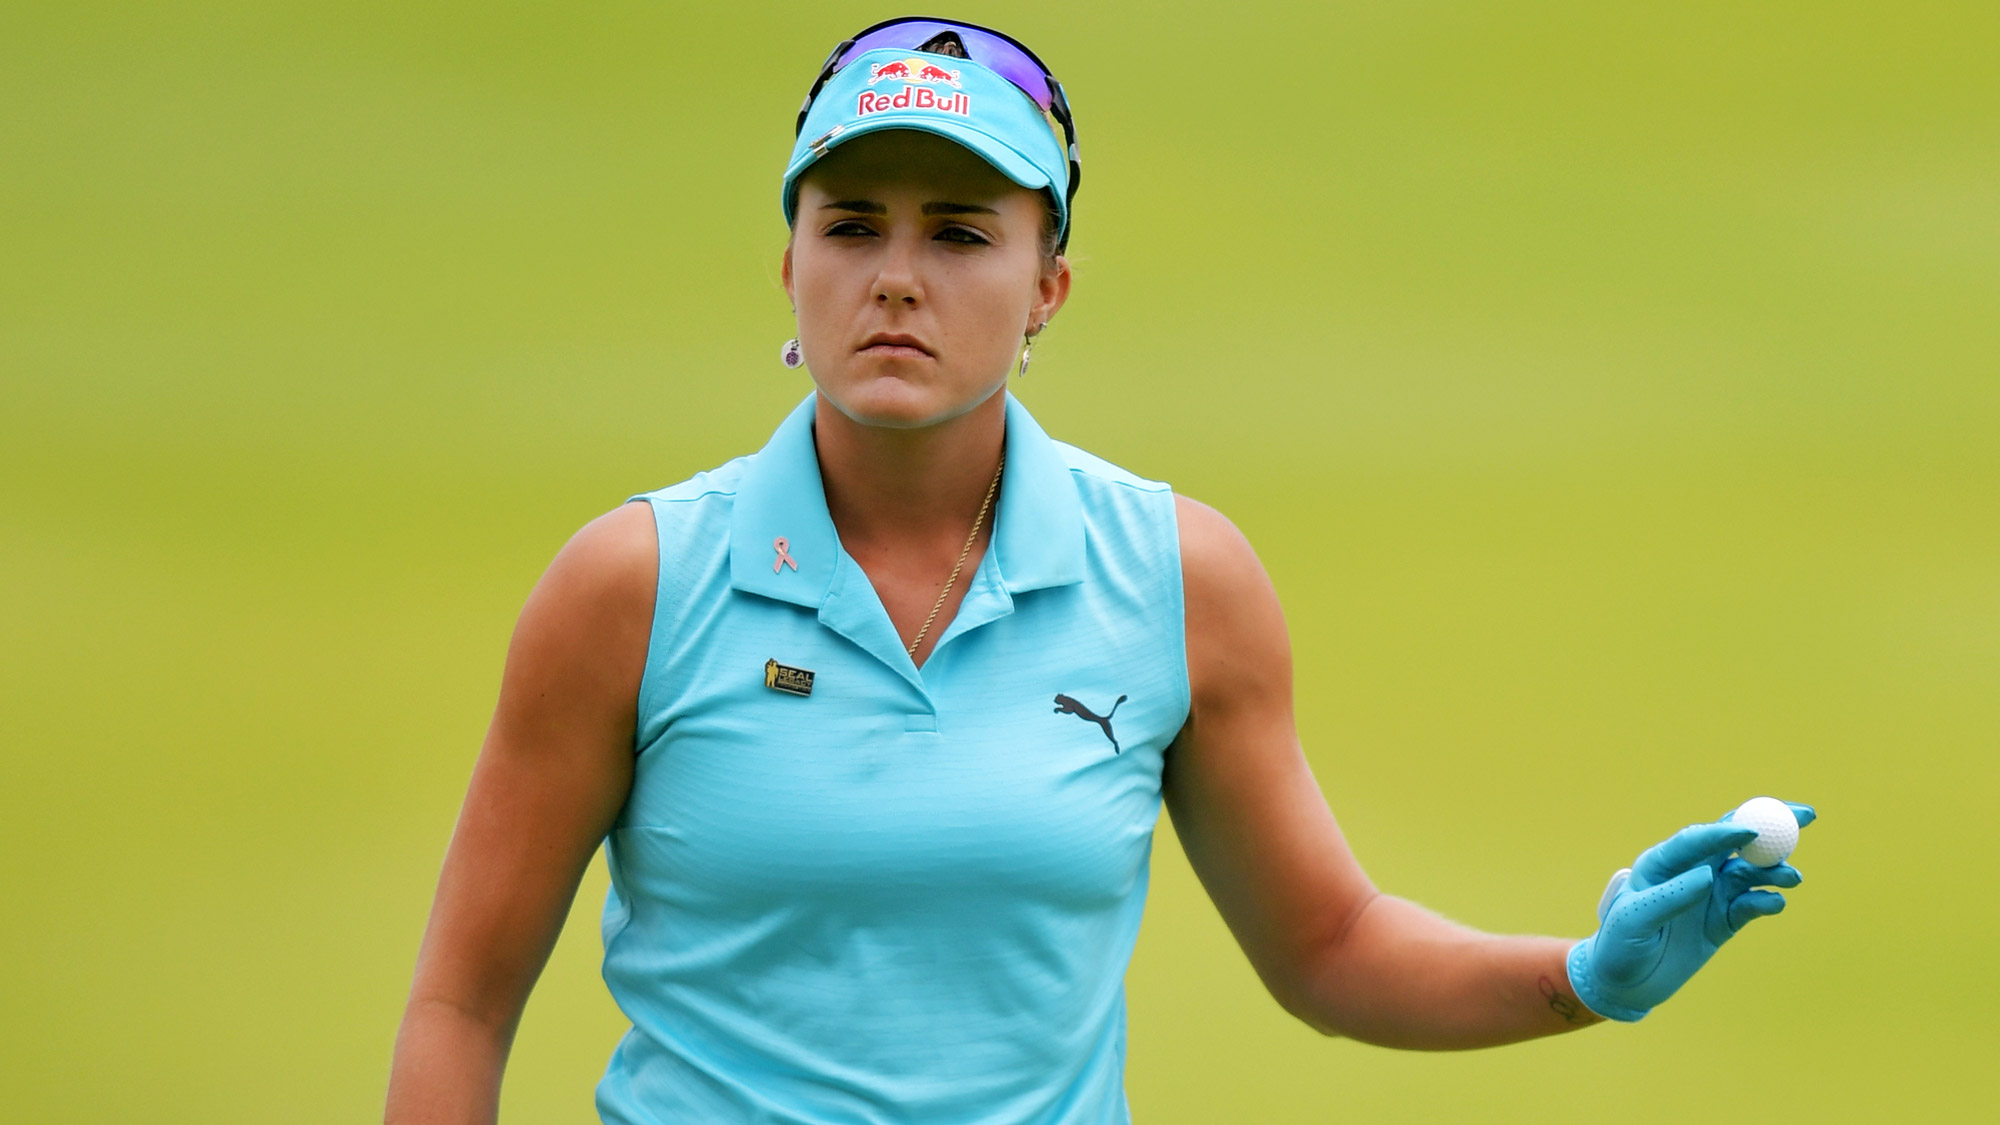 Lexi Thompson Acknowledges the Crowd in Arkansas